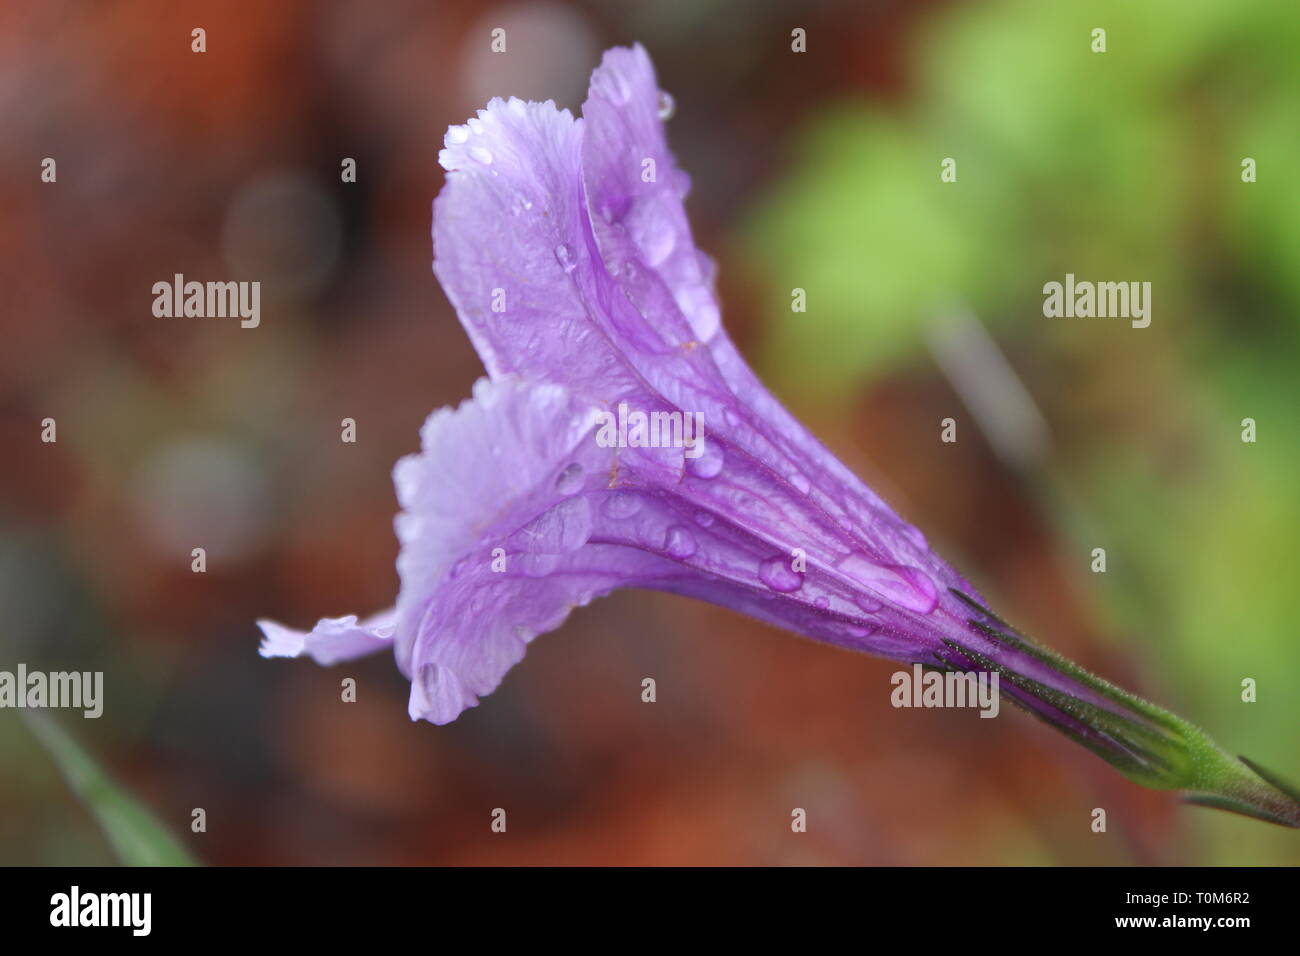 Close up image of a purple flower Stock Photo